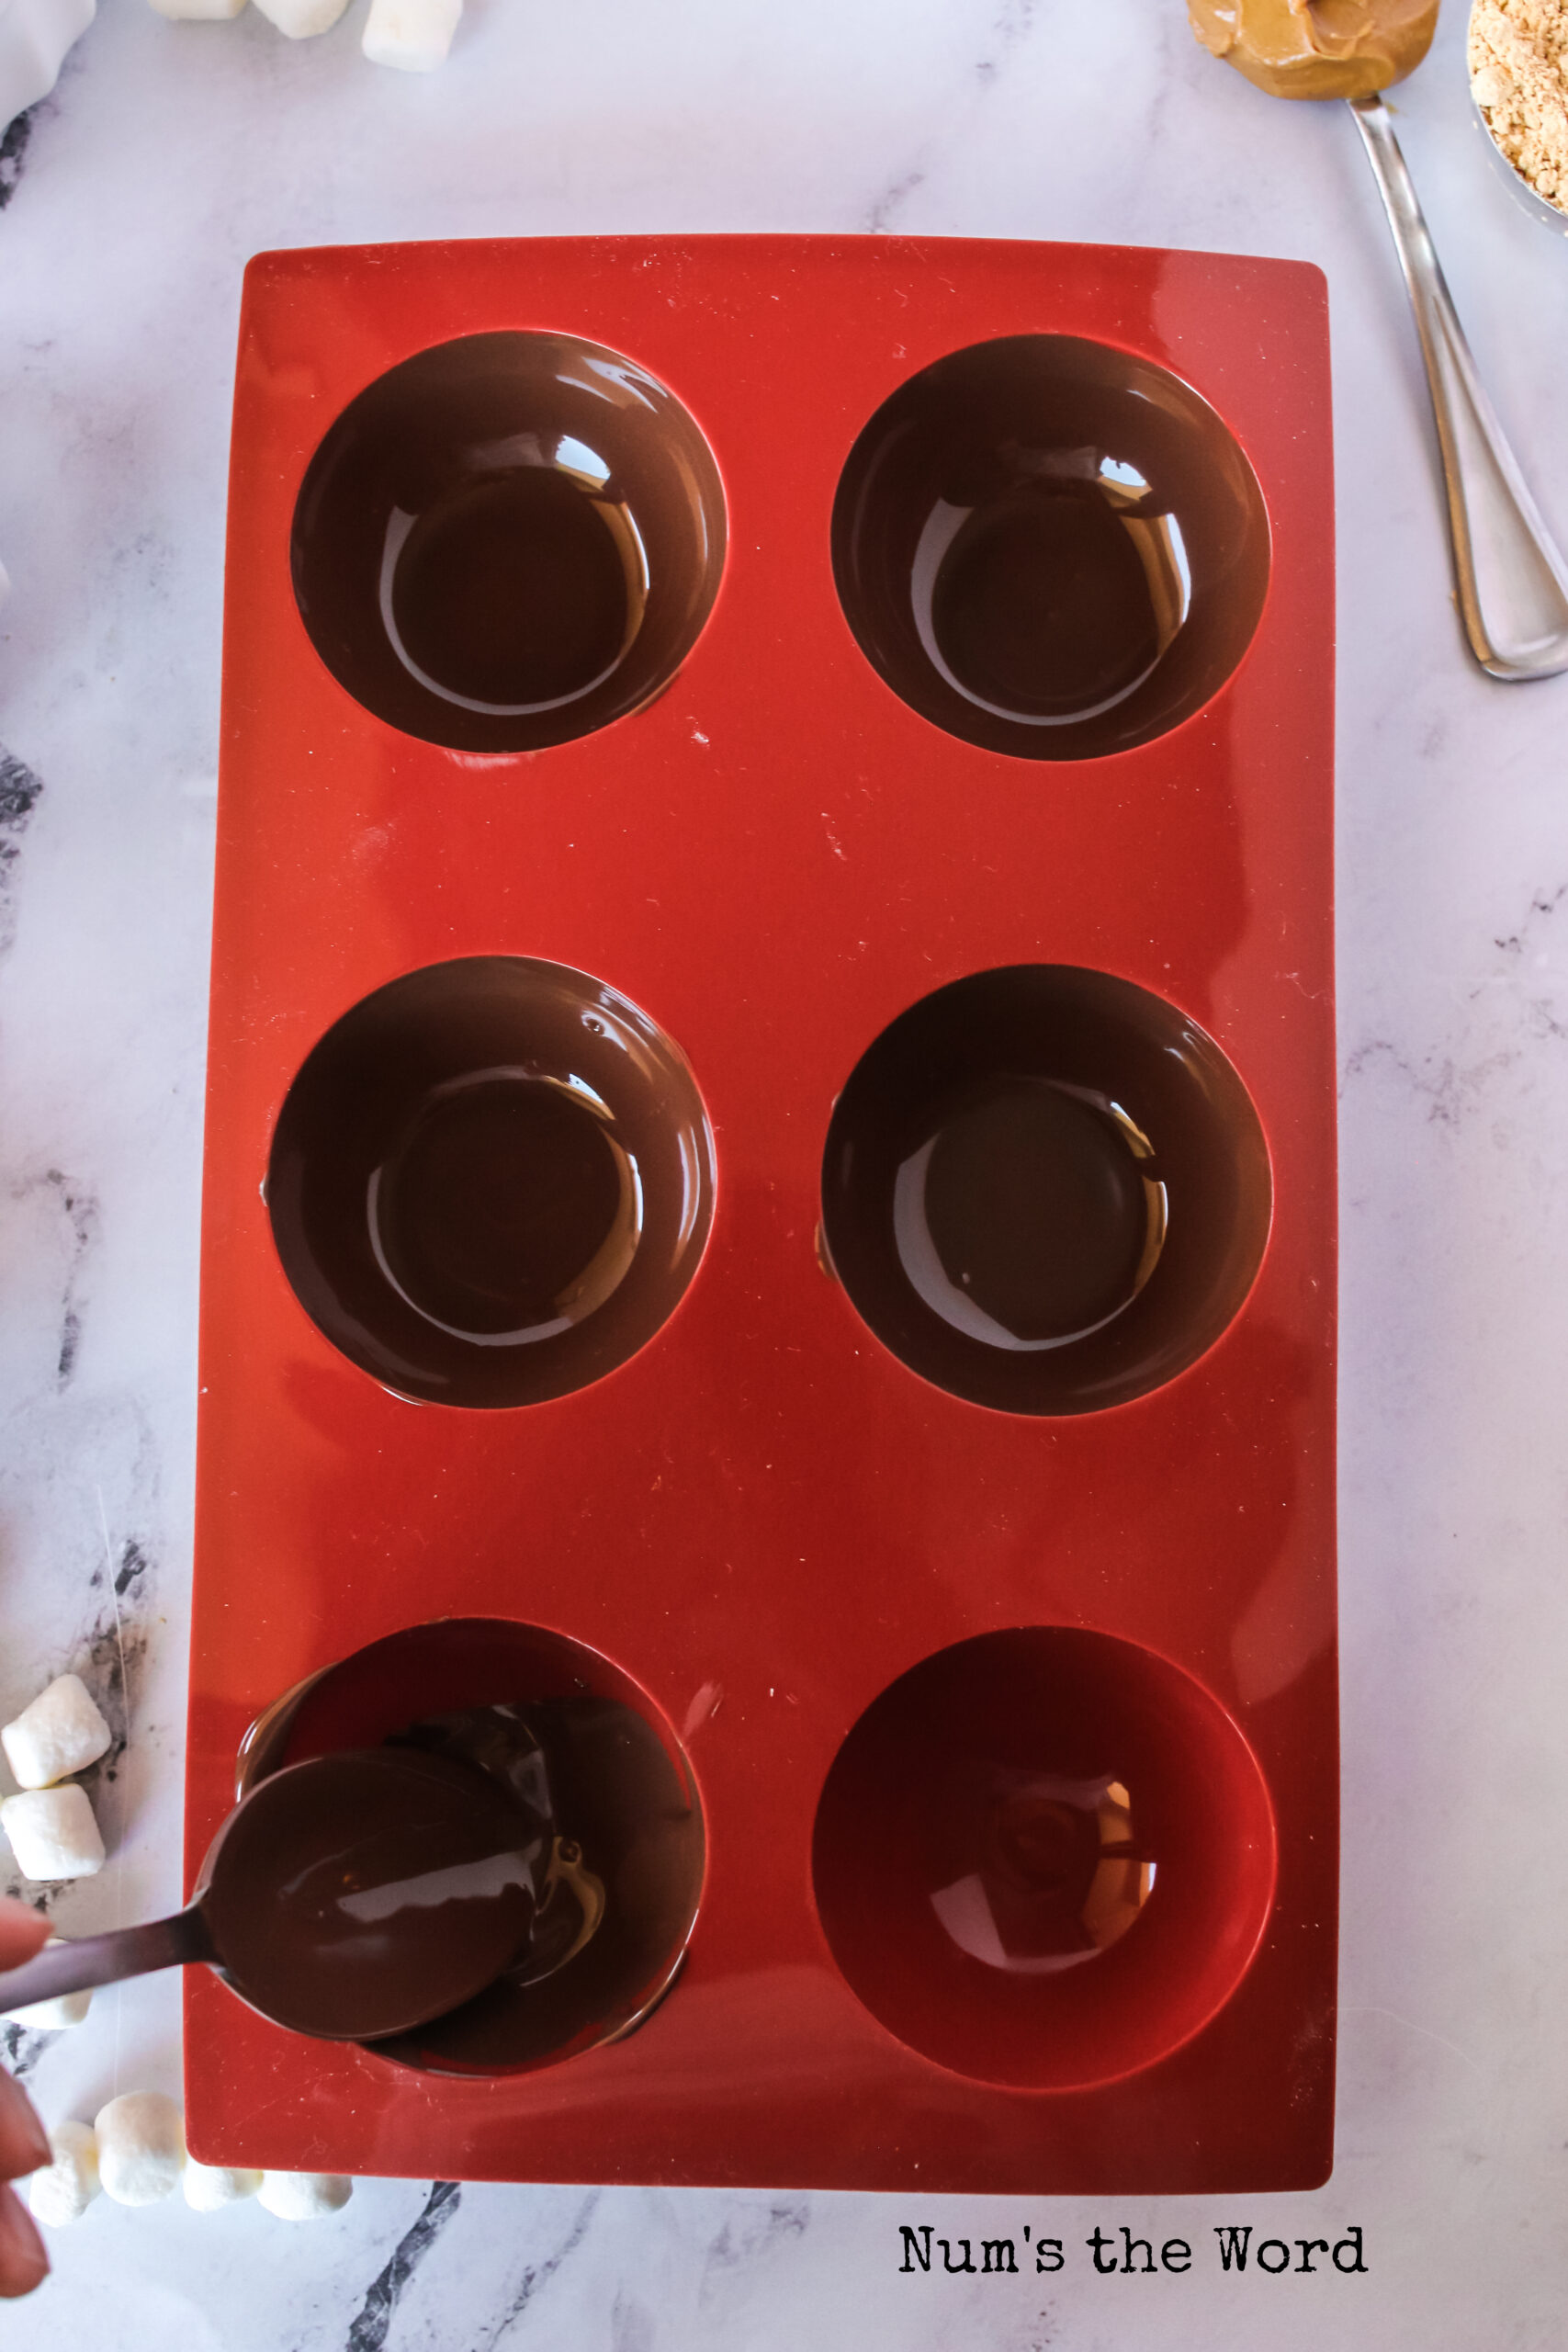 melted chocolate spread inside a silicone chocolate mold.